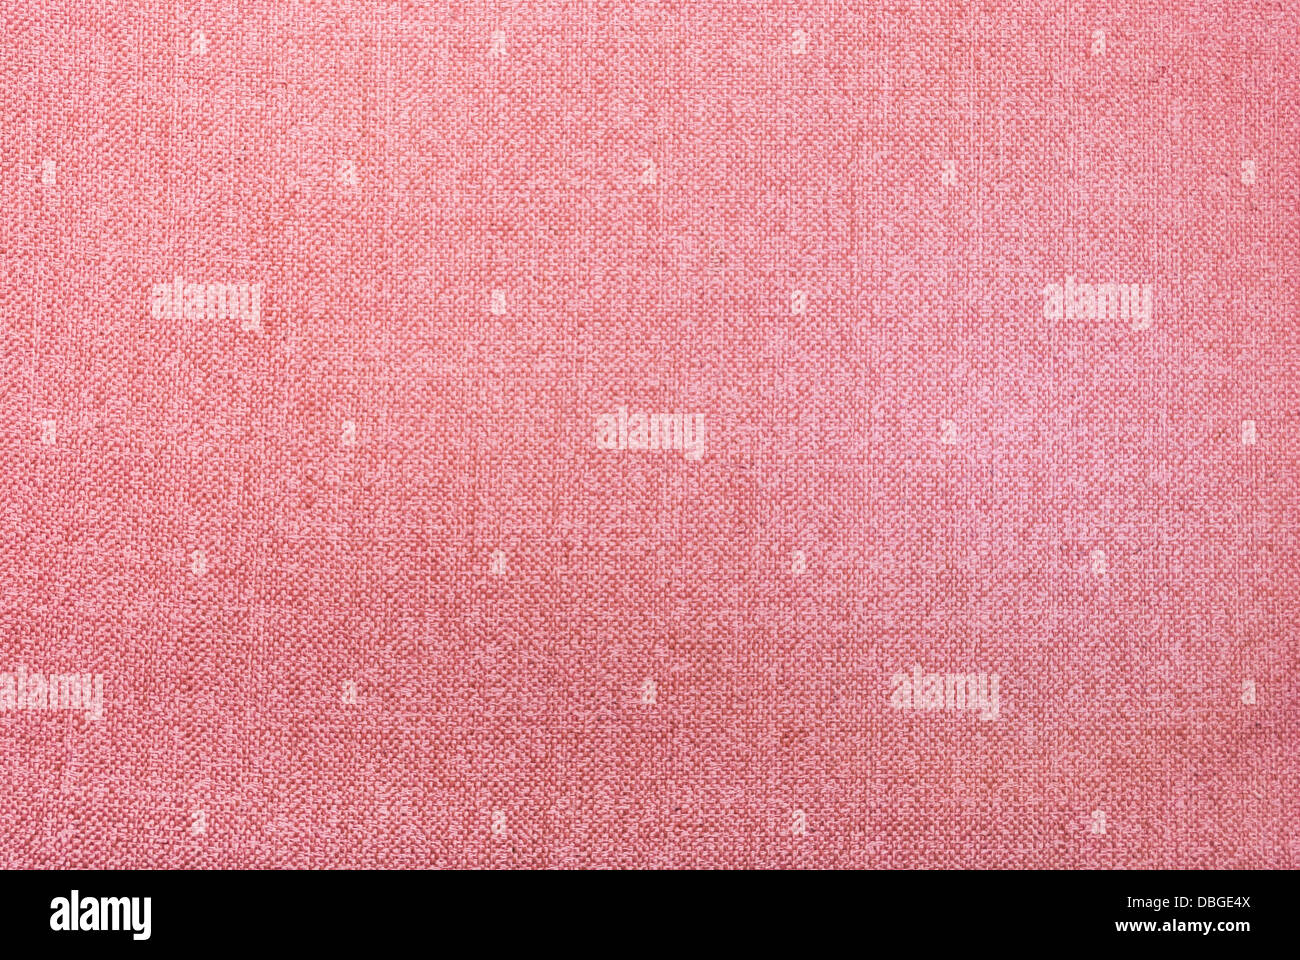 Pink Fabric Texture/ Background. Stock Photo